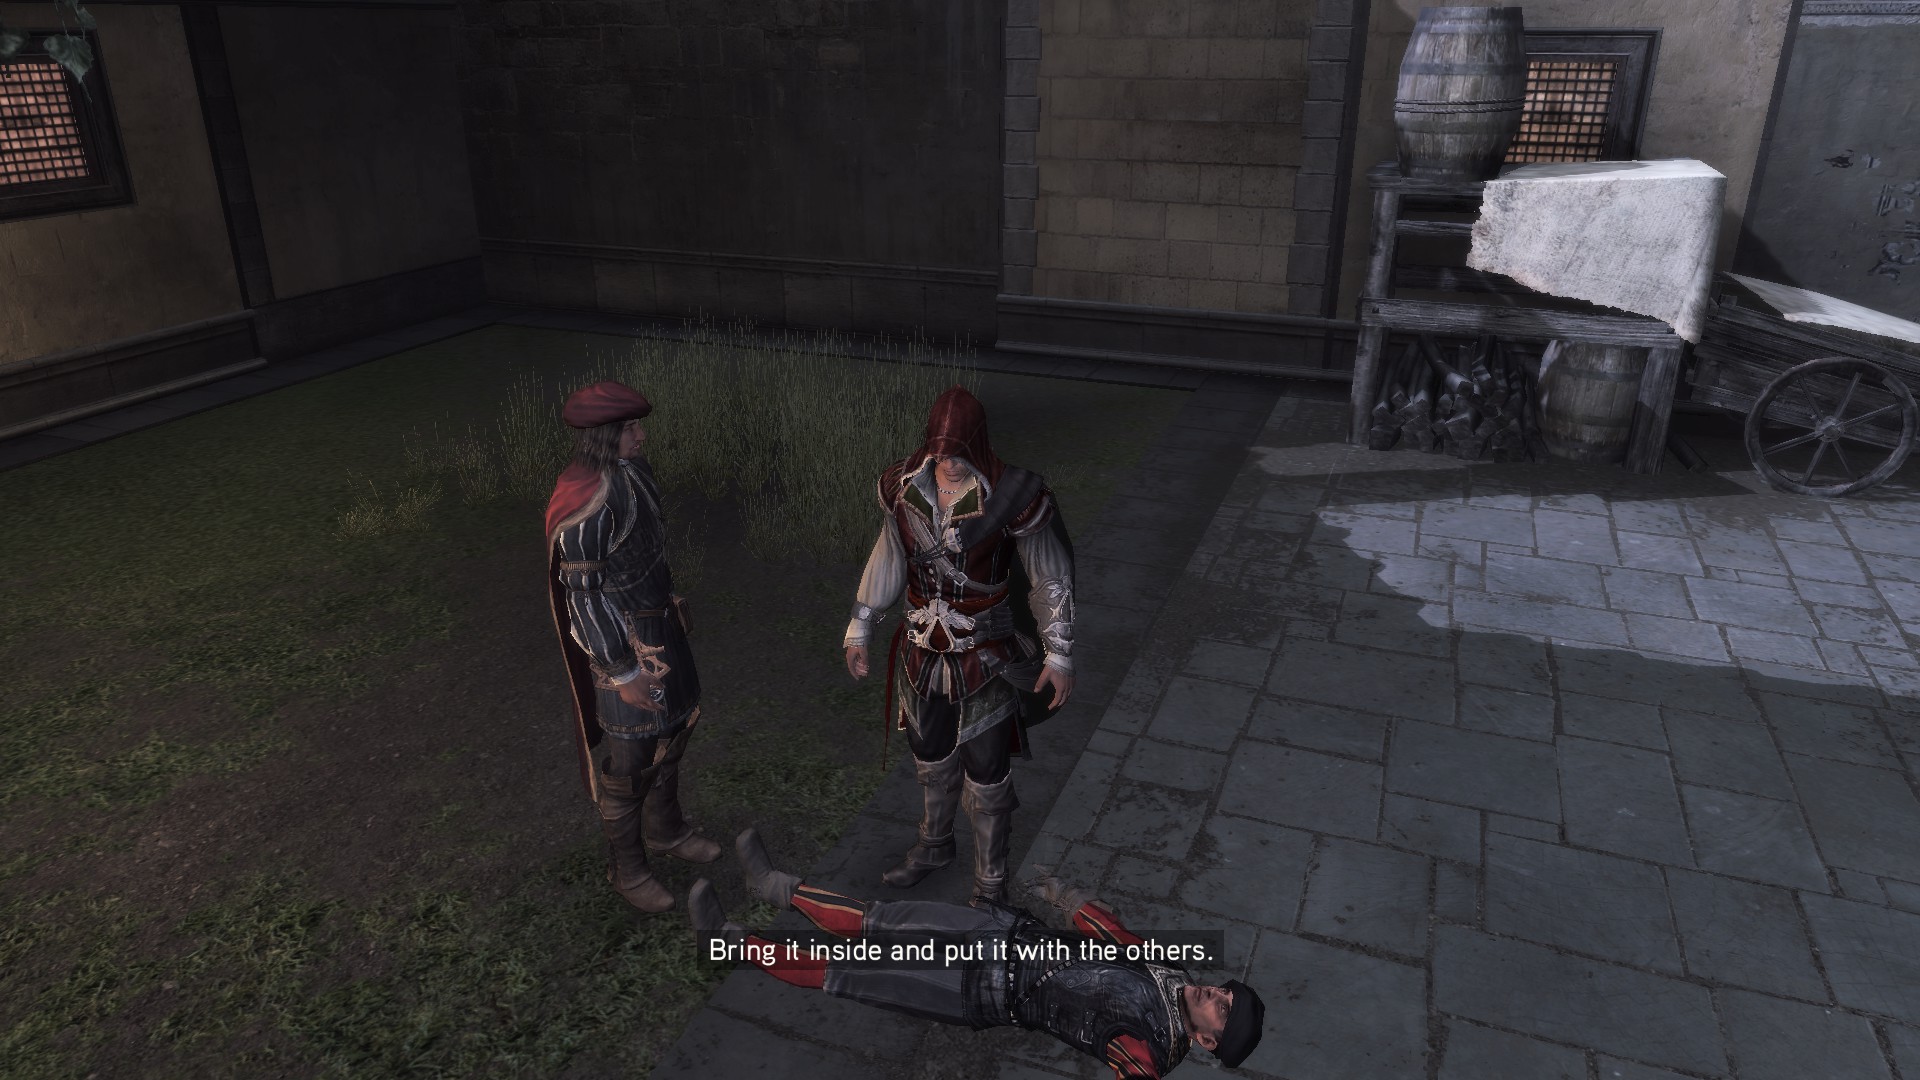 The Story of Assassin's Creed 2 